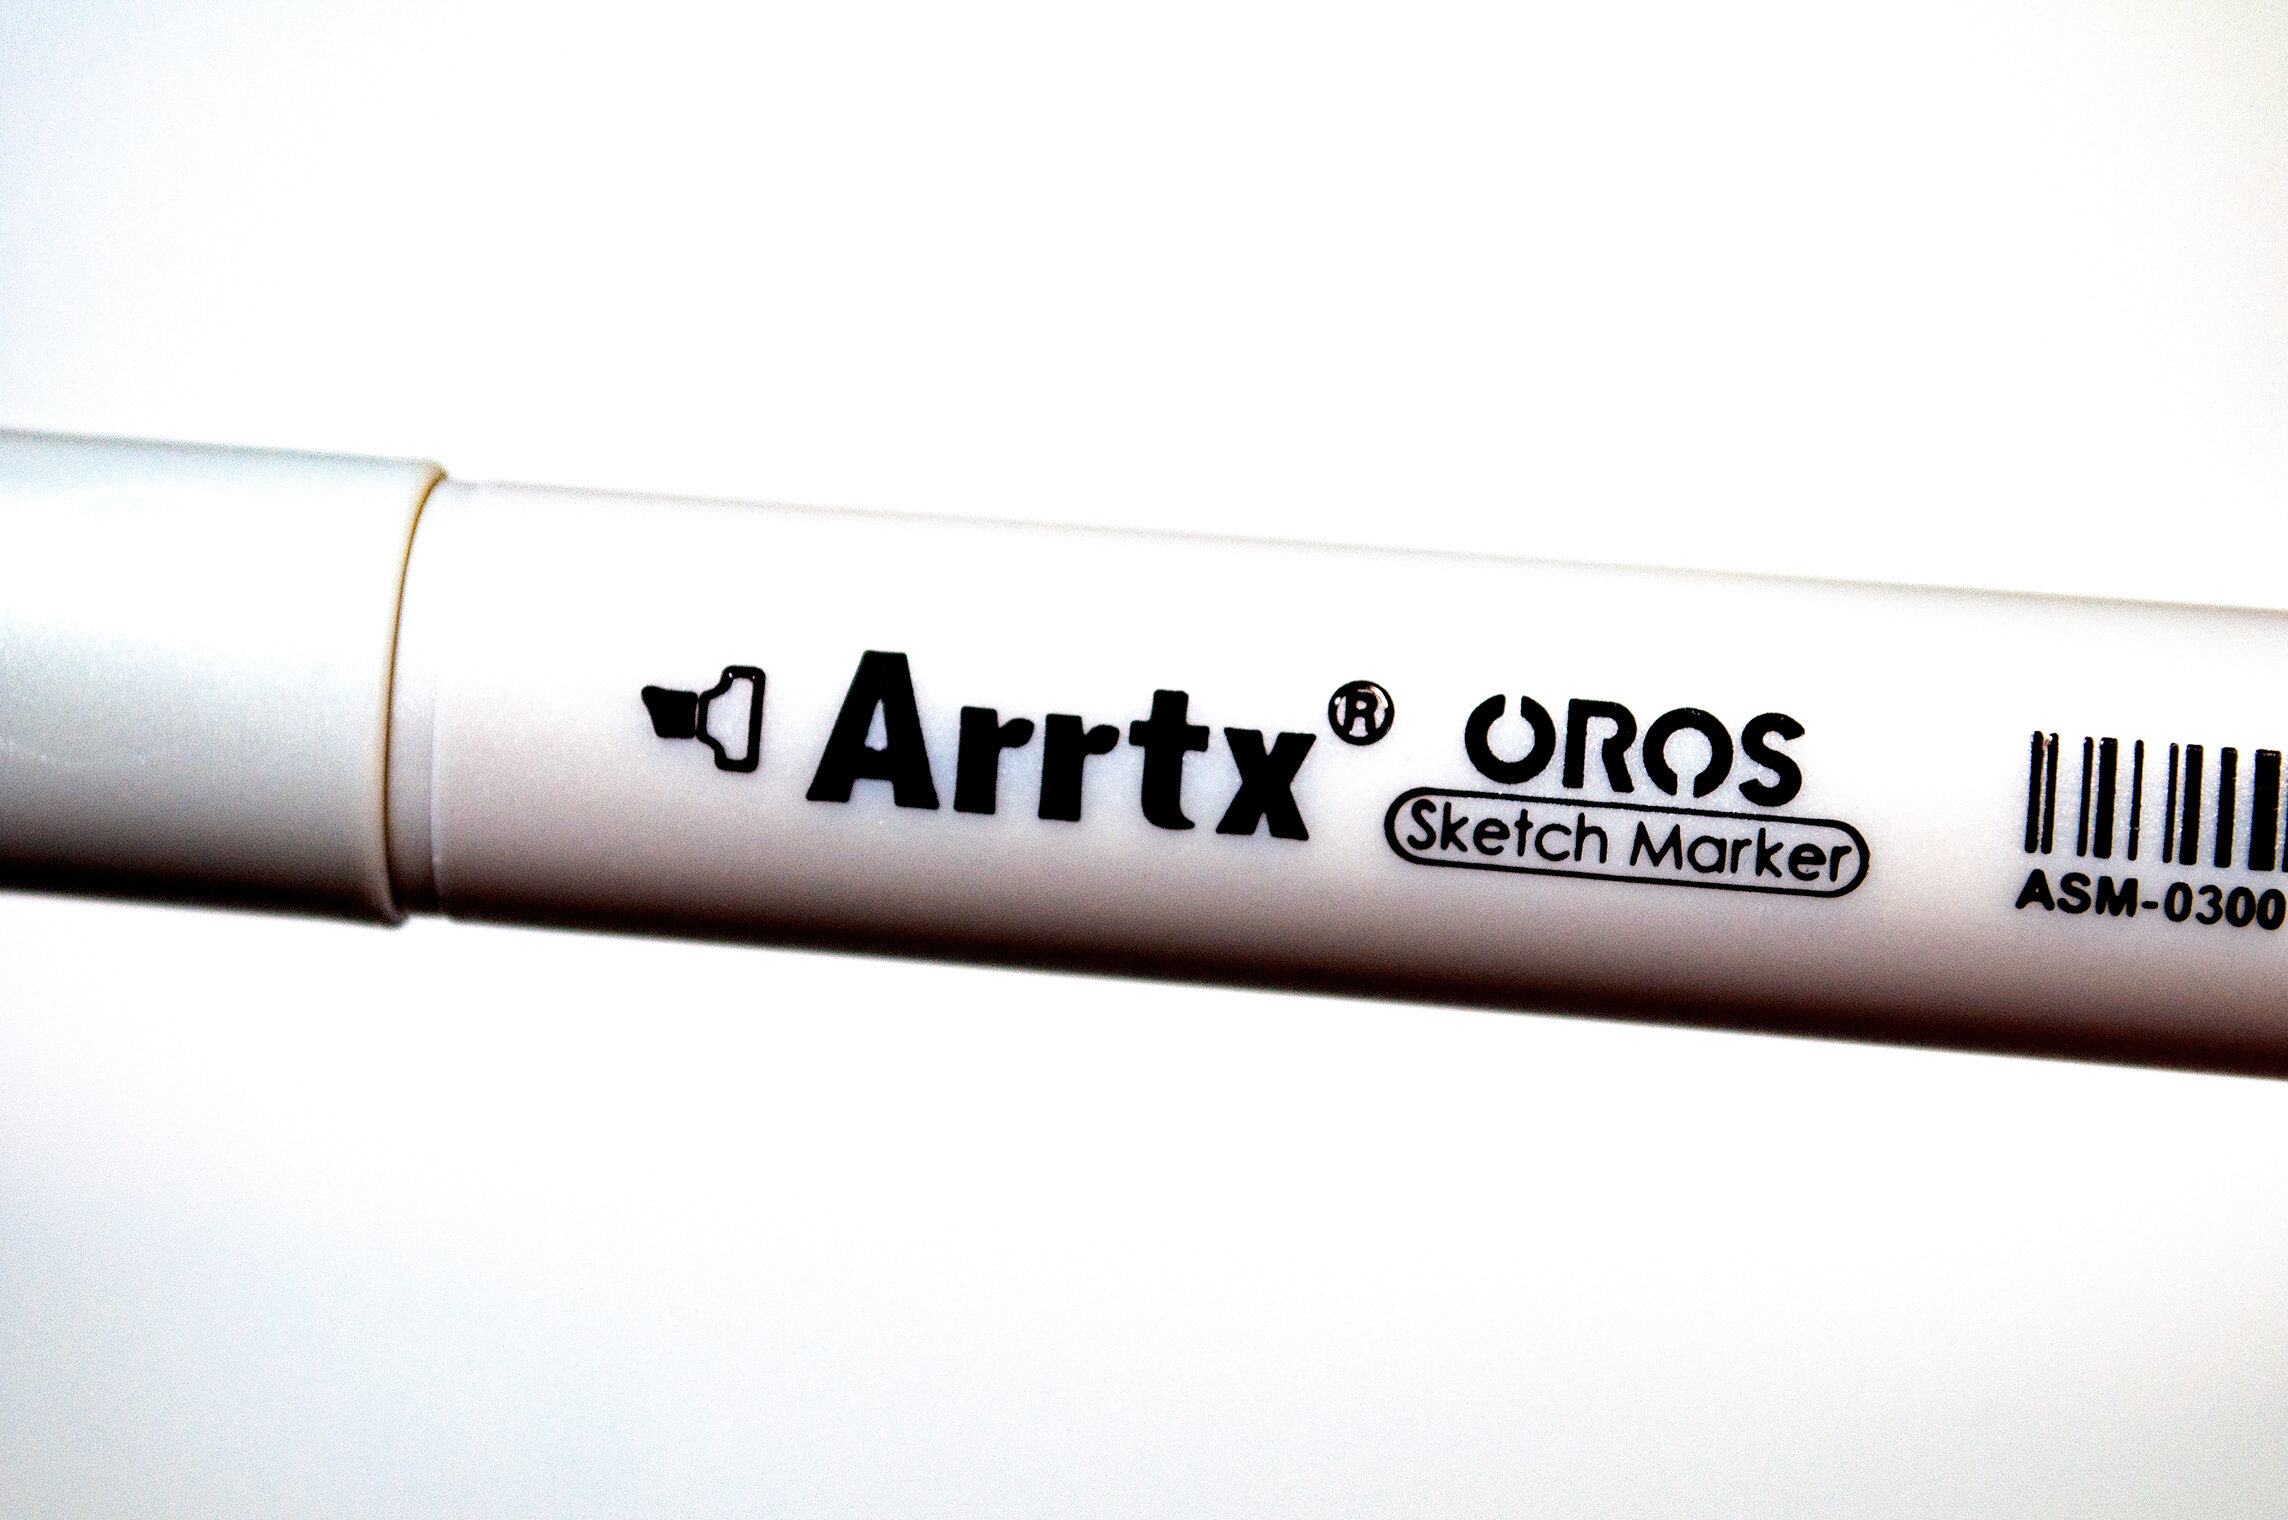 Arrtx OROS 80/90 Colors Alcohol Markers Brush Tip Sketching